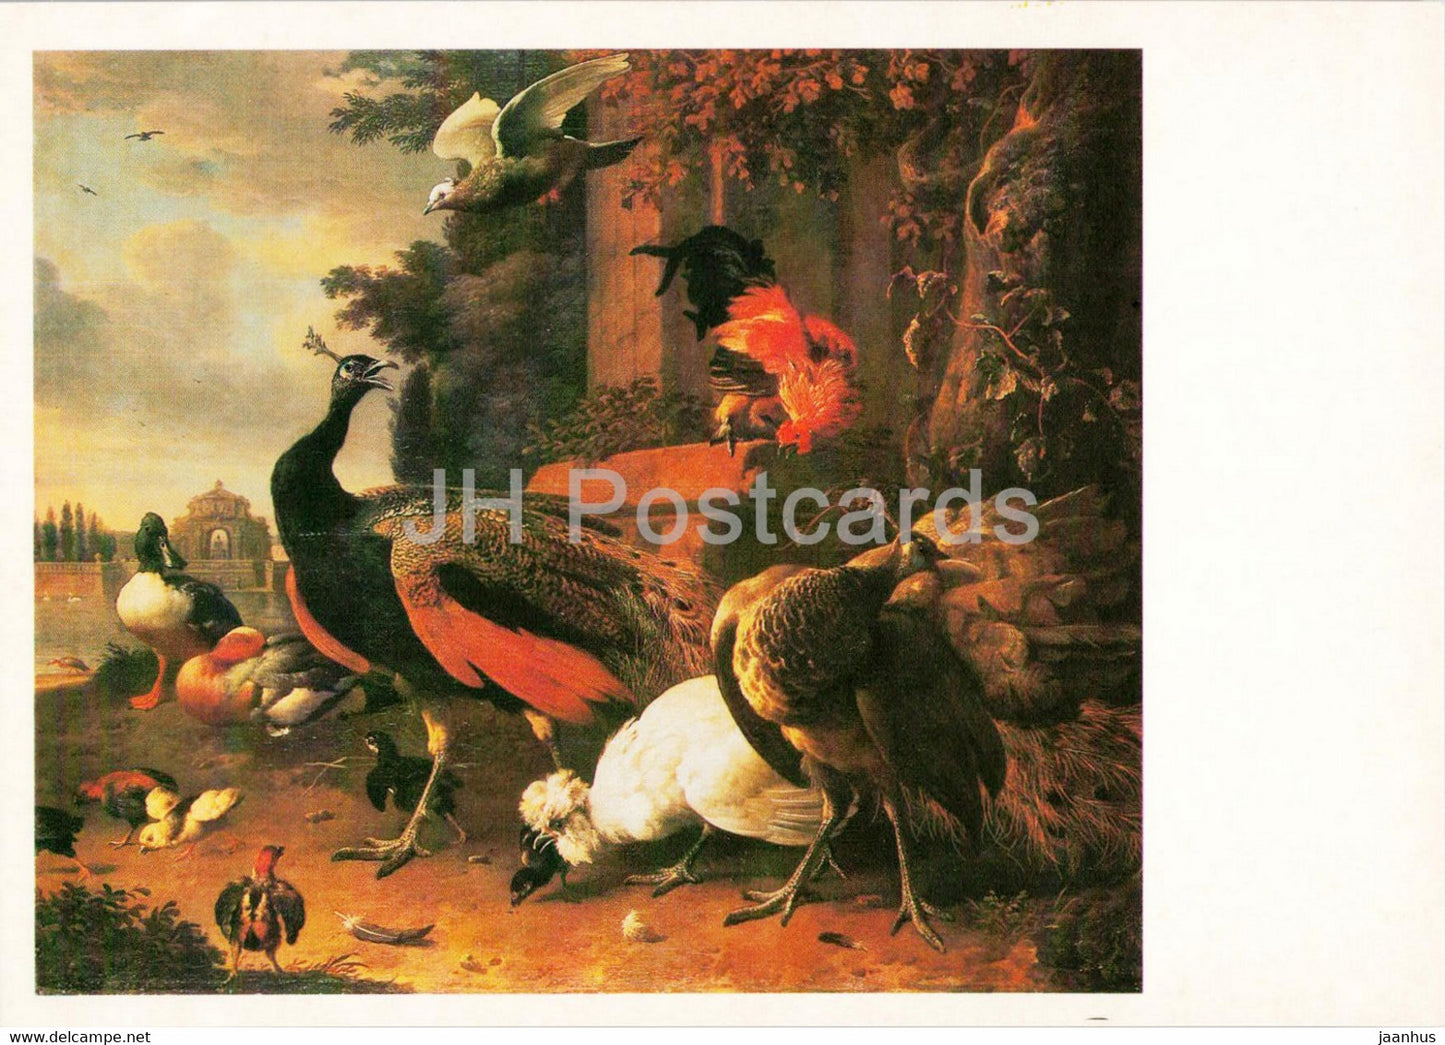 painting by Melchior d'Hondecoeter - Birds in the Park - Dutch art - 1987 - Russia USSR - unused - JH Postcards